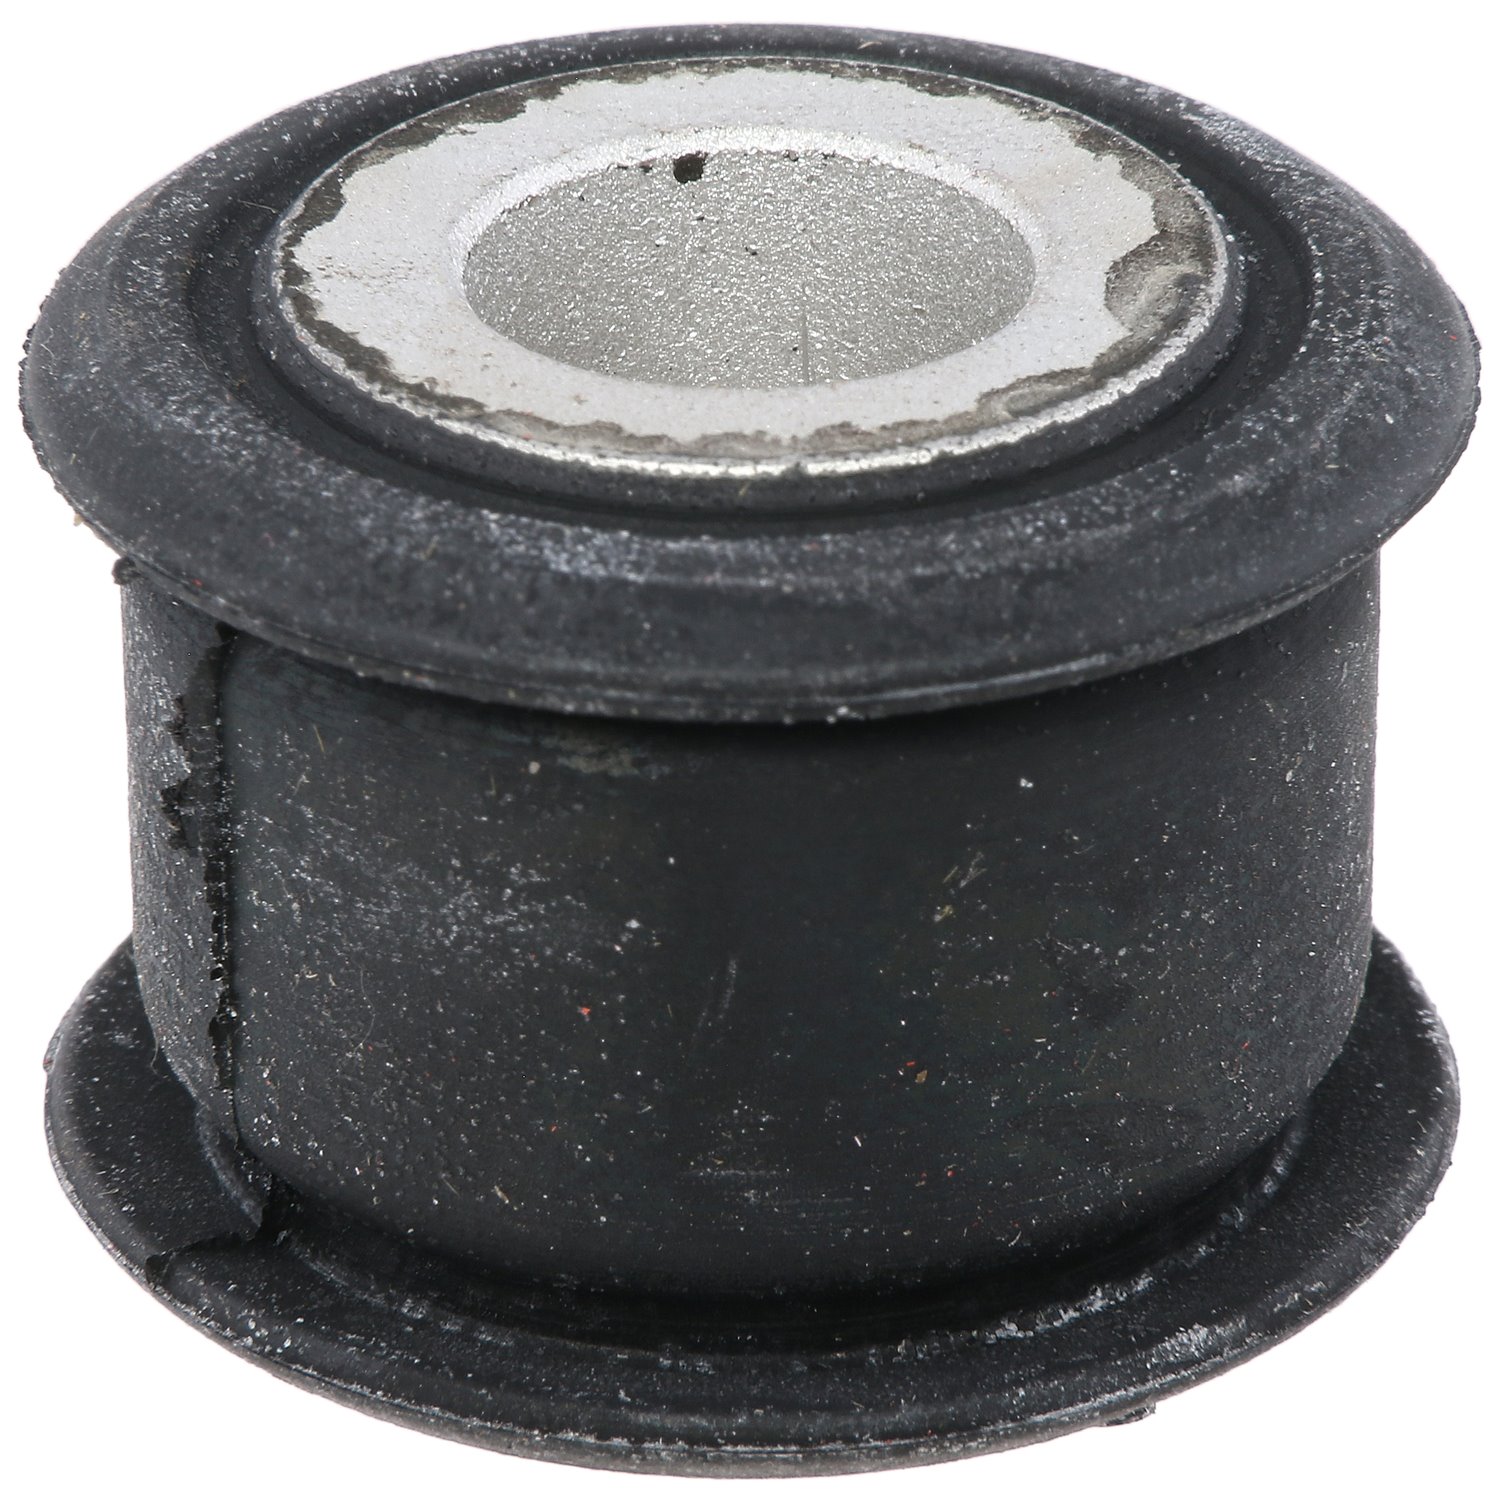 JBU2727 Rack and Pinion Mount Bushing Fits Select Acura Models, Position: Left/Driver or Right/Passenger, Rear